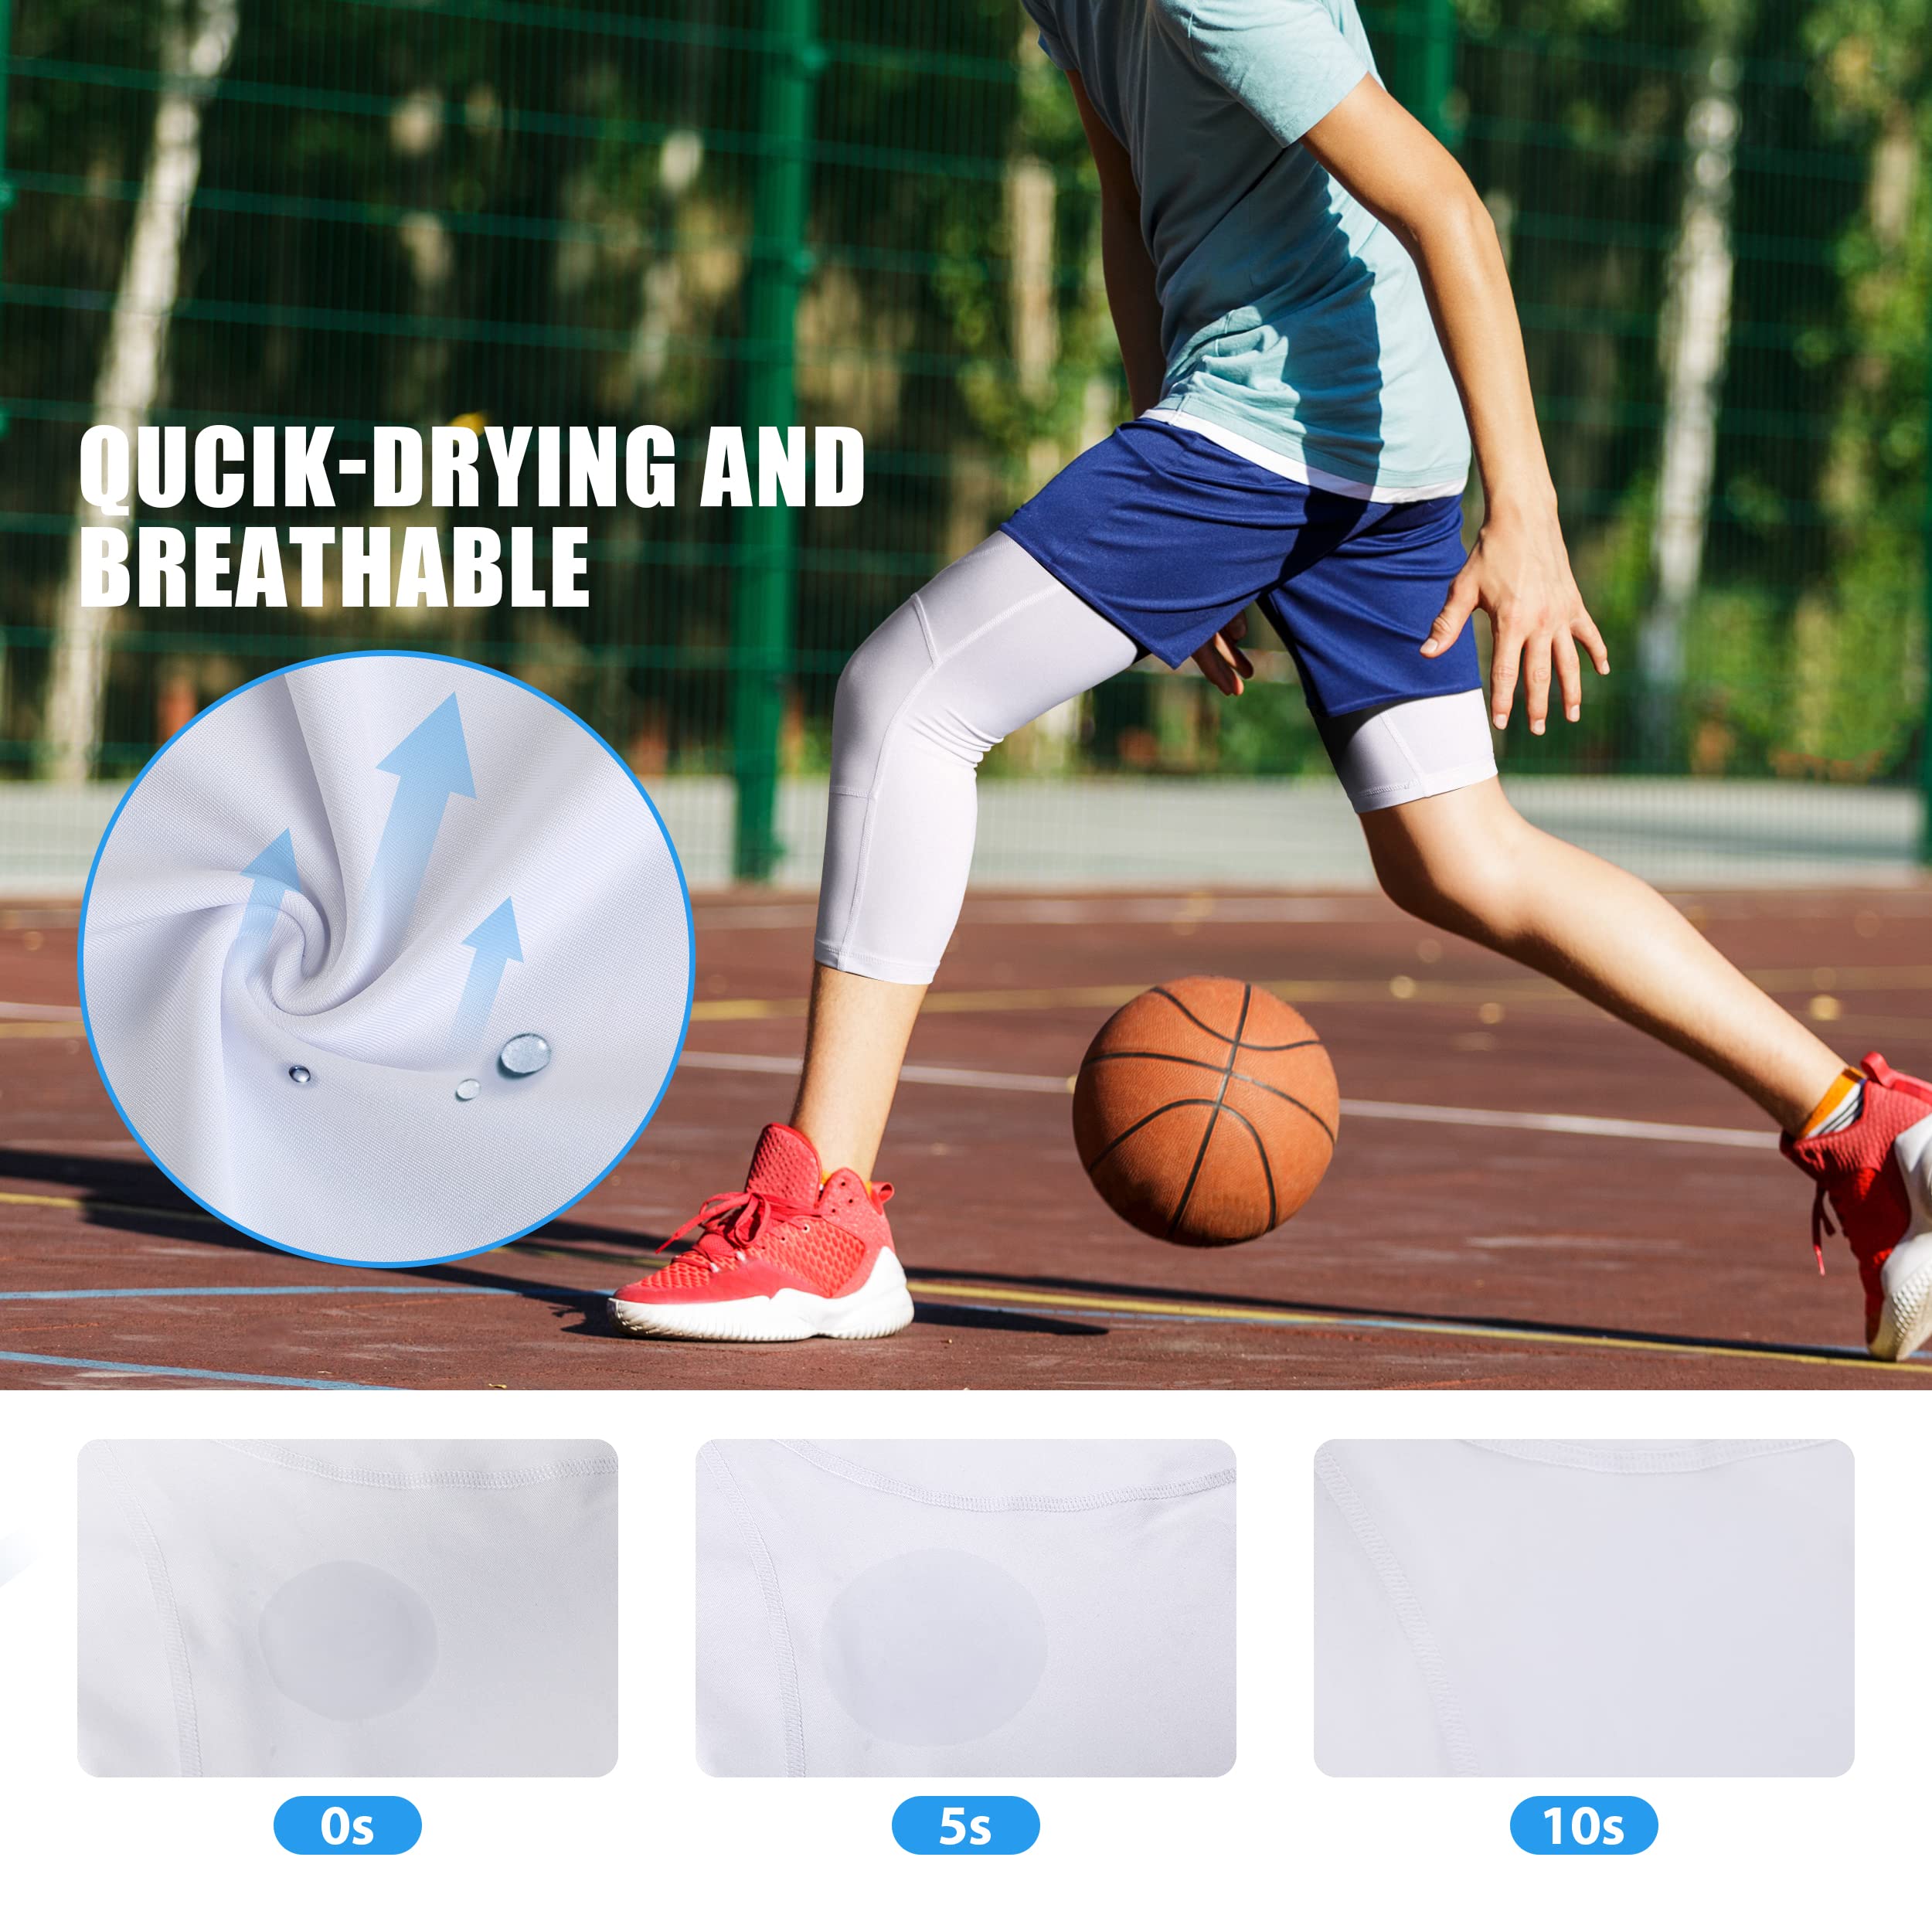 Runhit Boys Compression Leggings,Athletic Tights Basketball